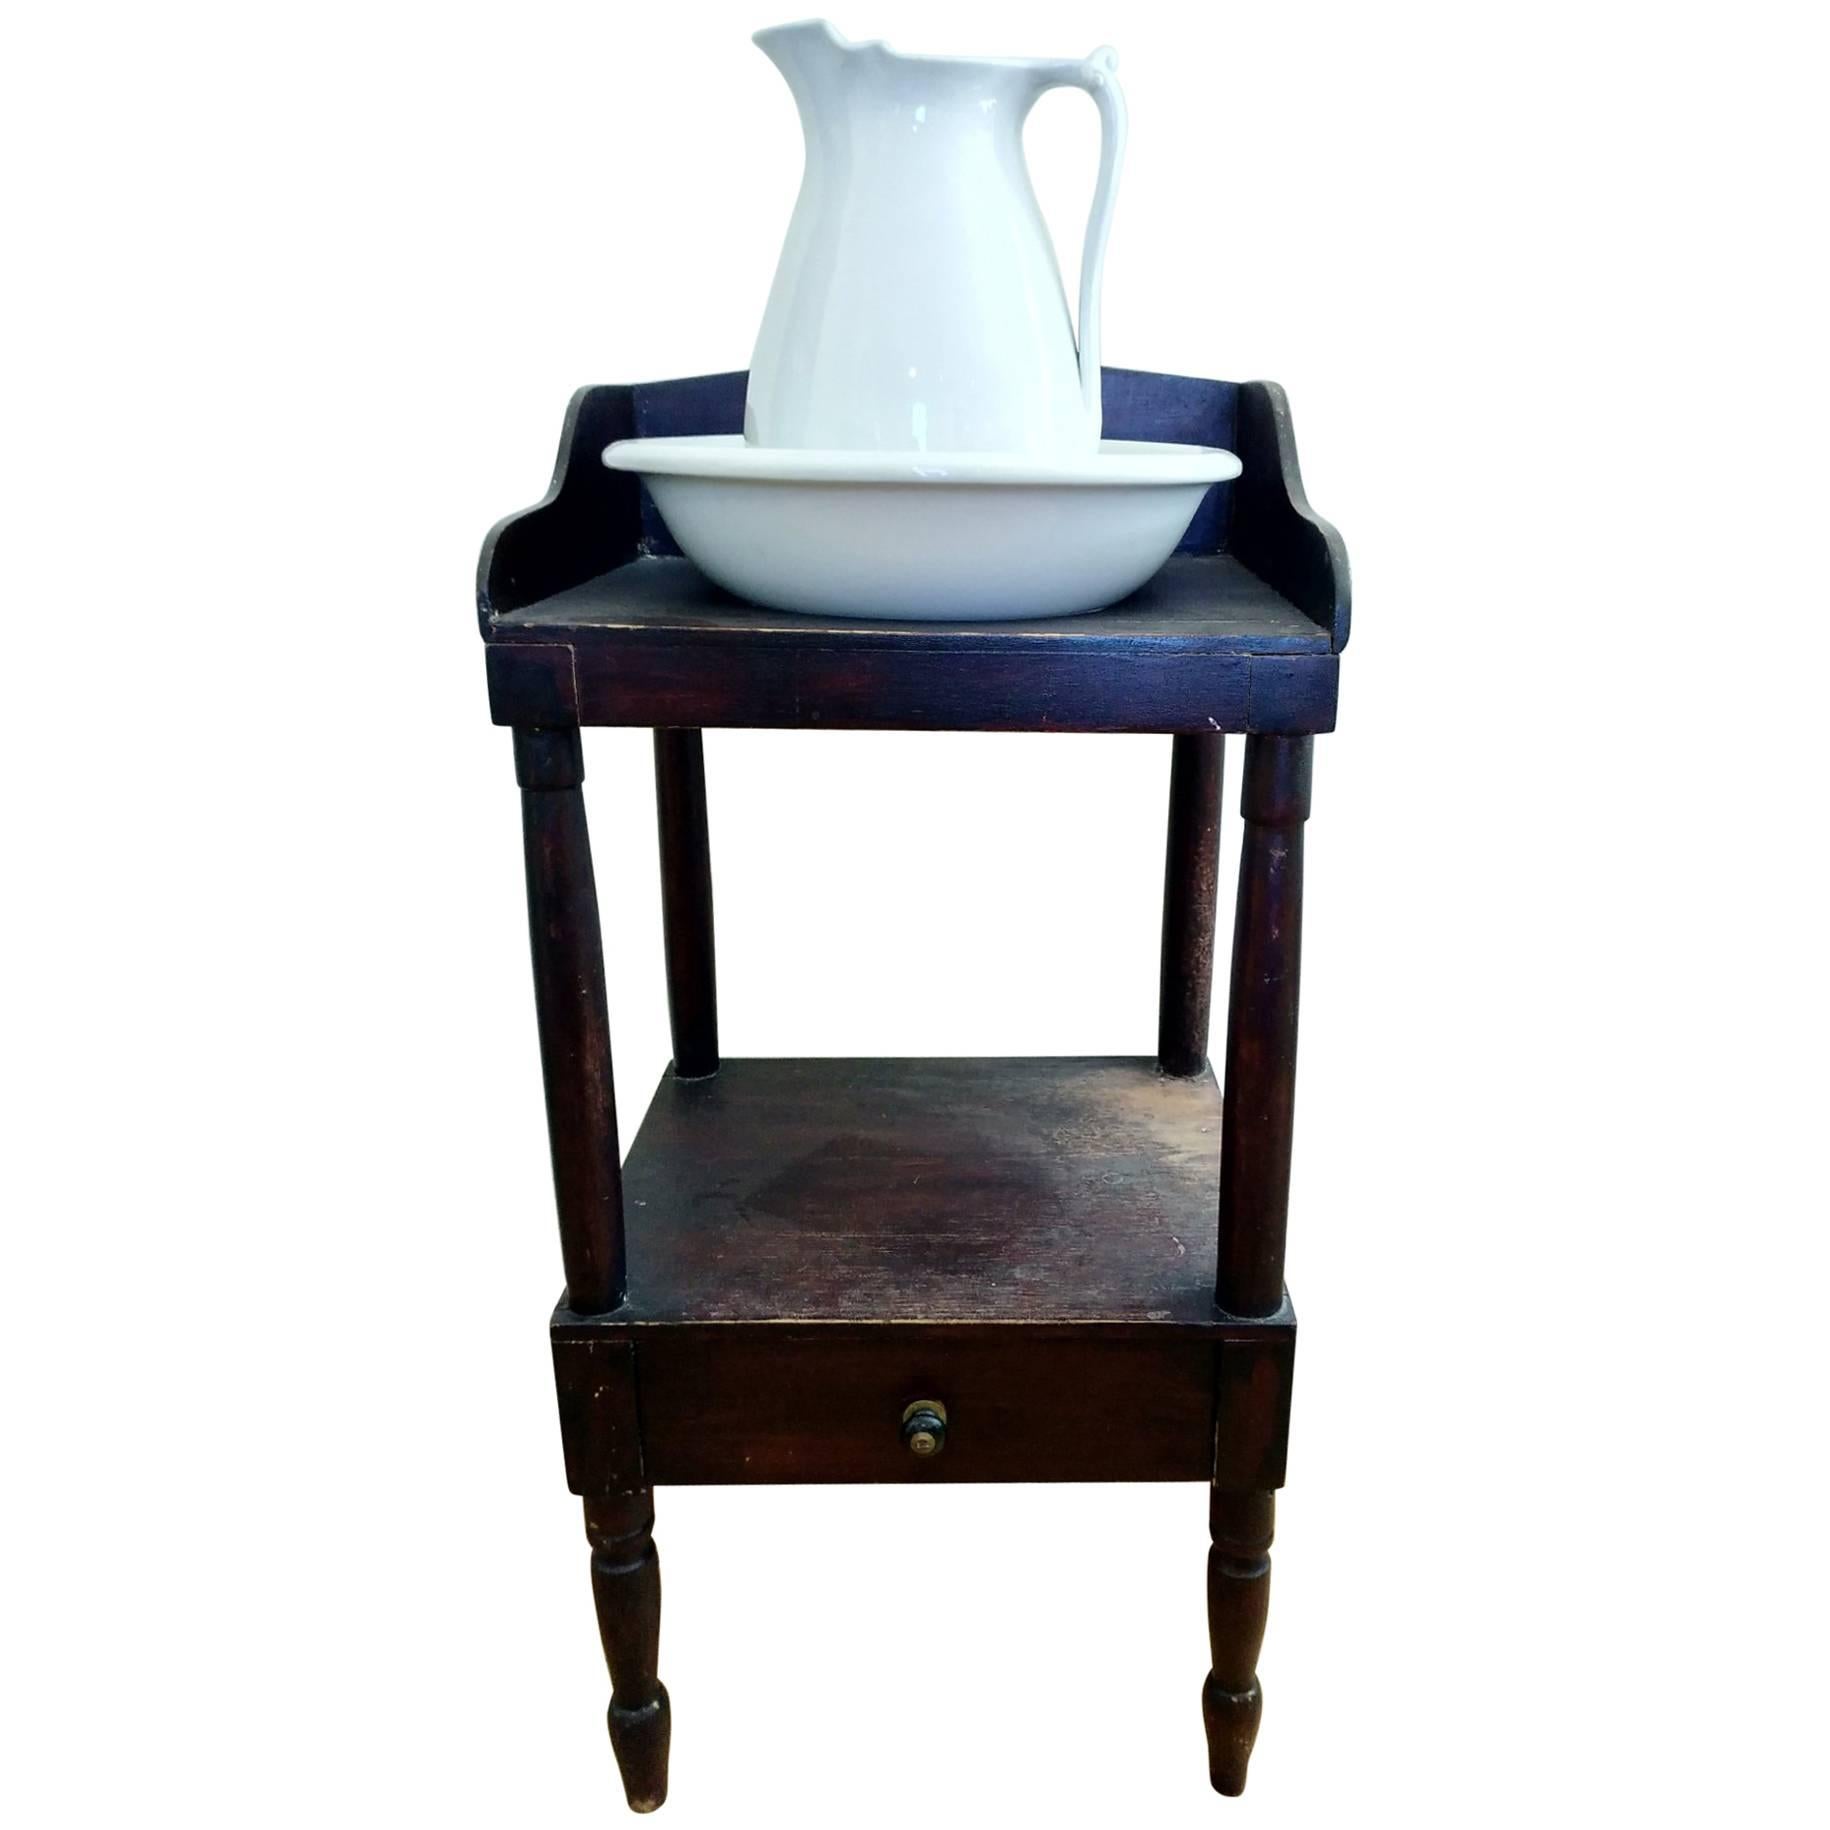 Wash Stand with Bowl and Pitcher